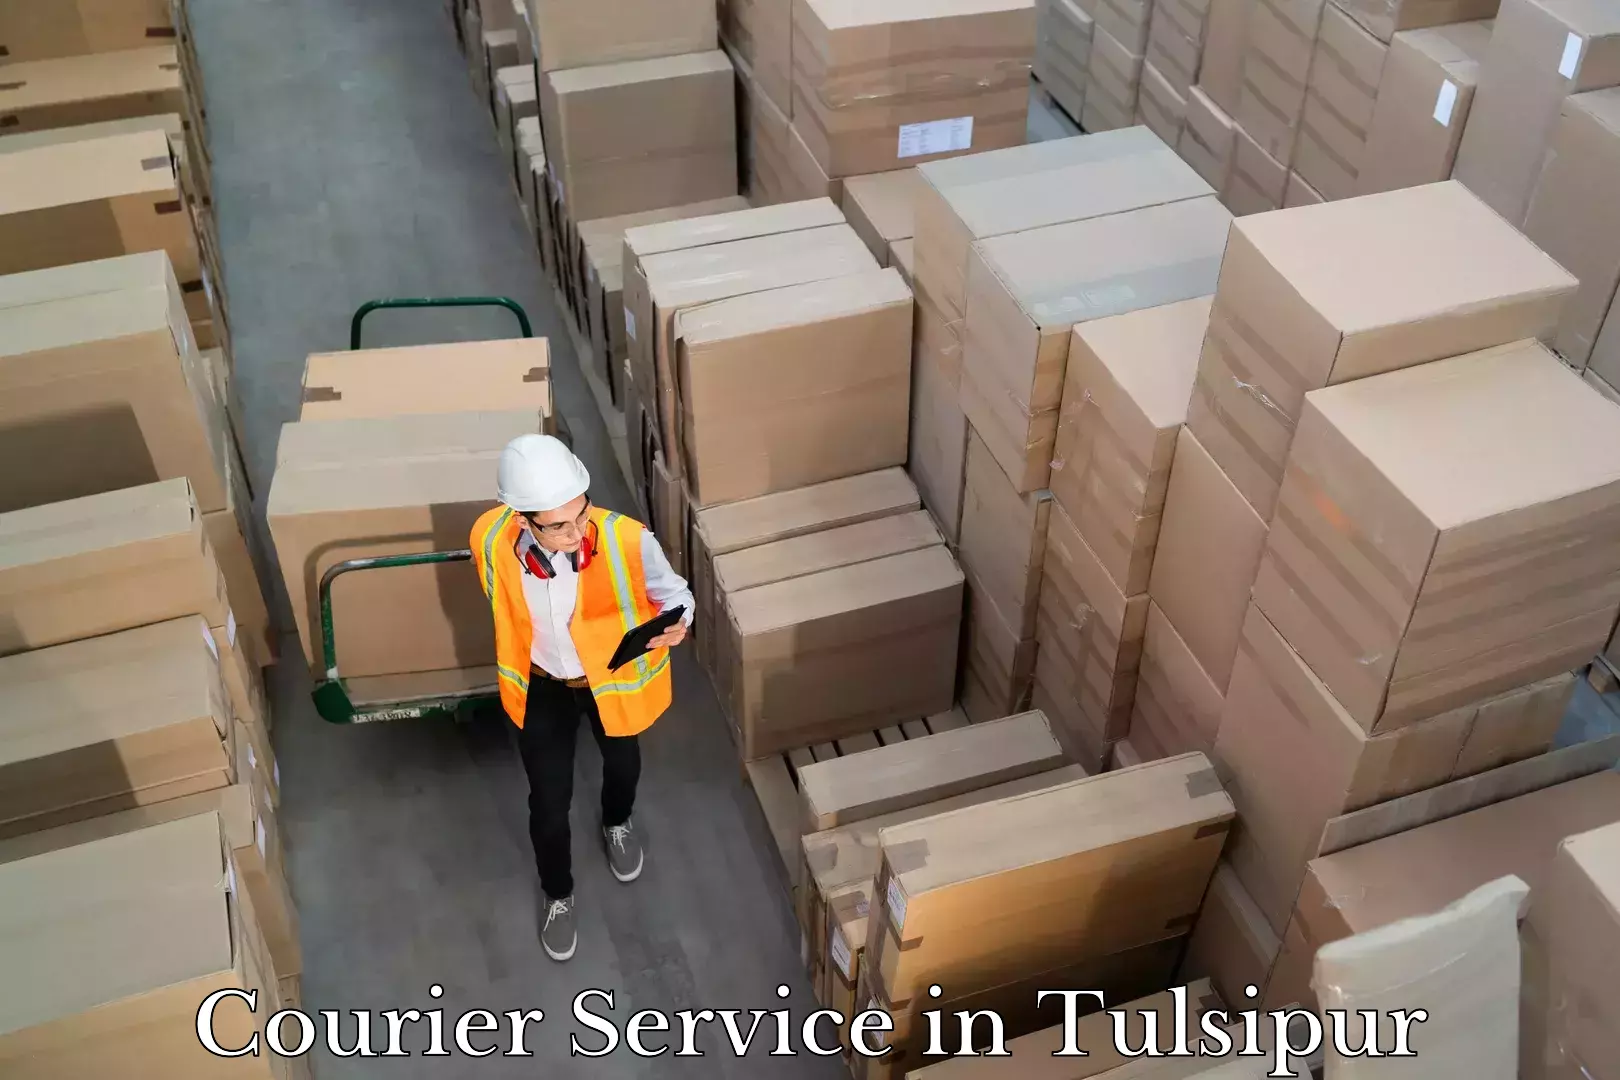 Parcel service for businesses in Tulsipur